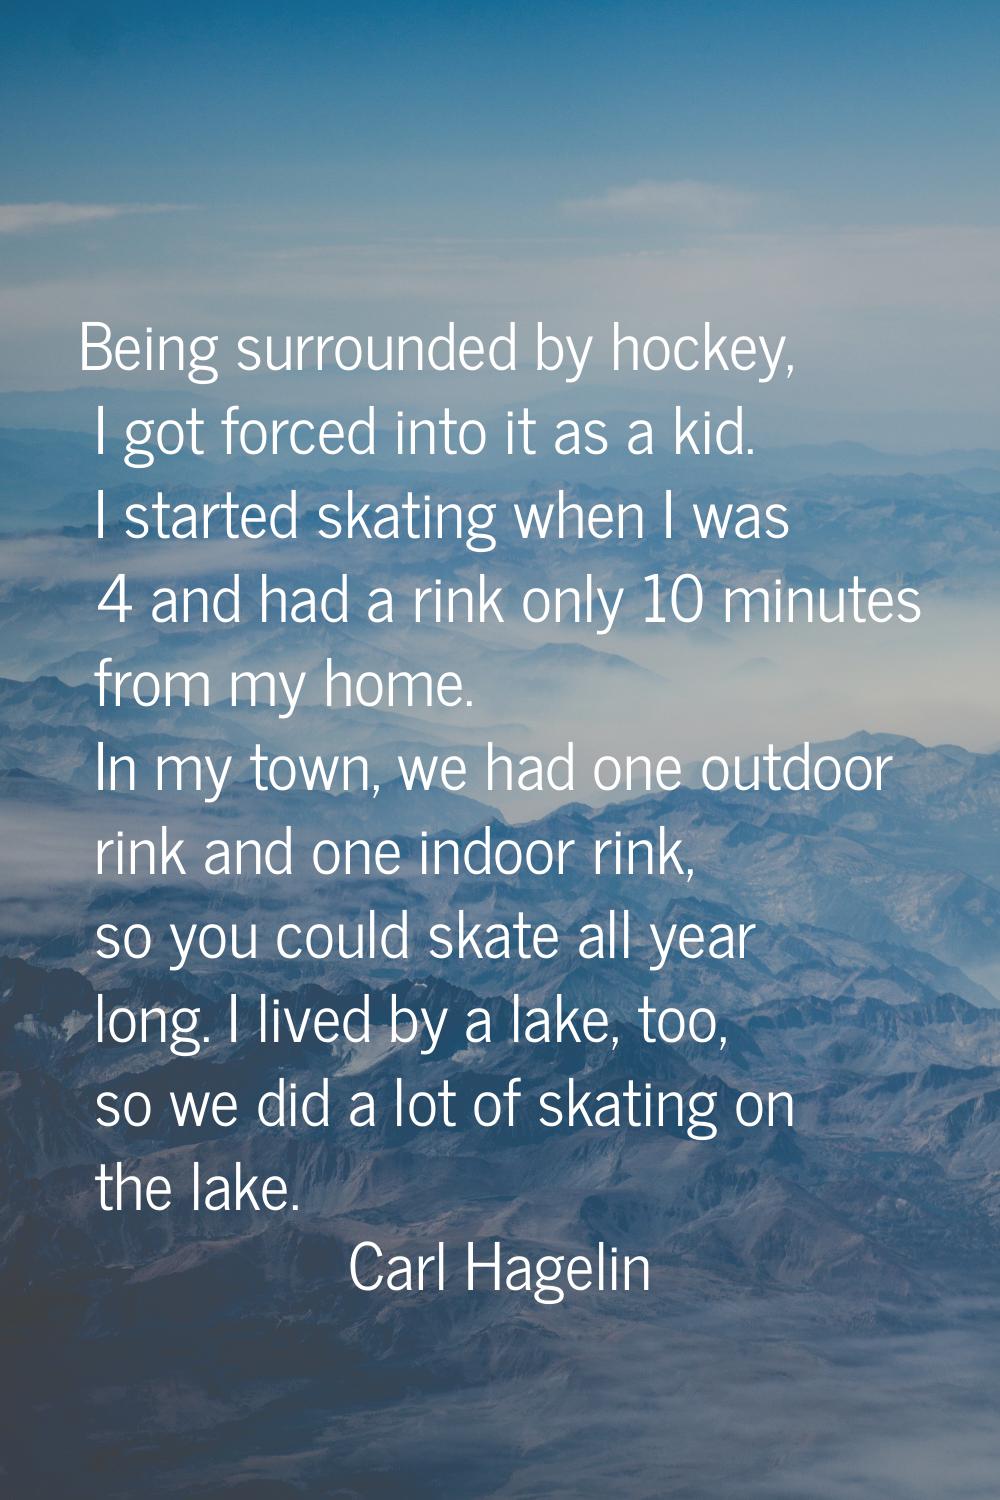 Being surrounded by hockey, I got forced into it as a kid. I started skating when I was 4 and had a